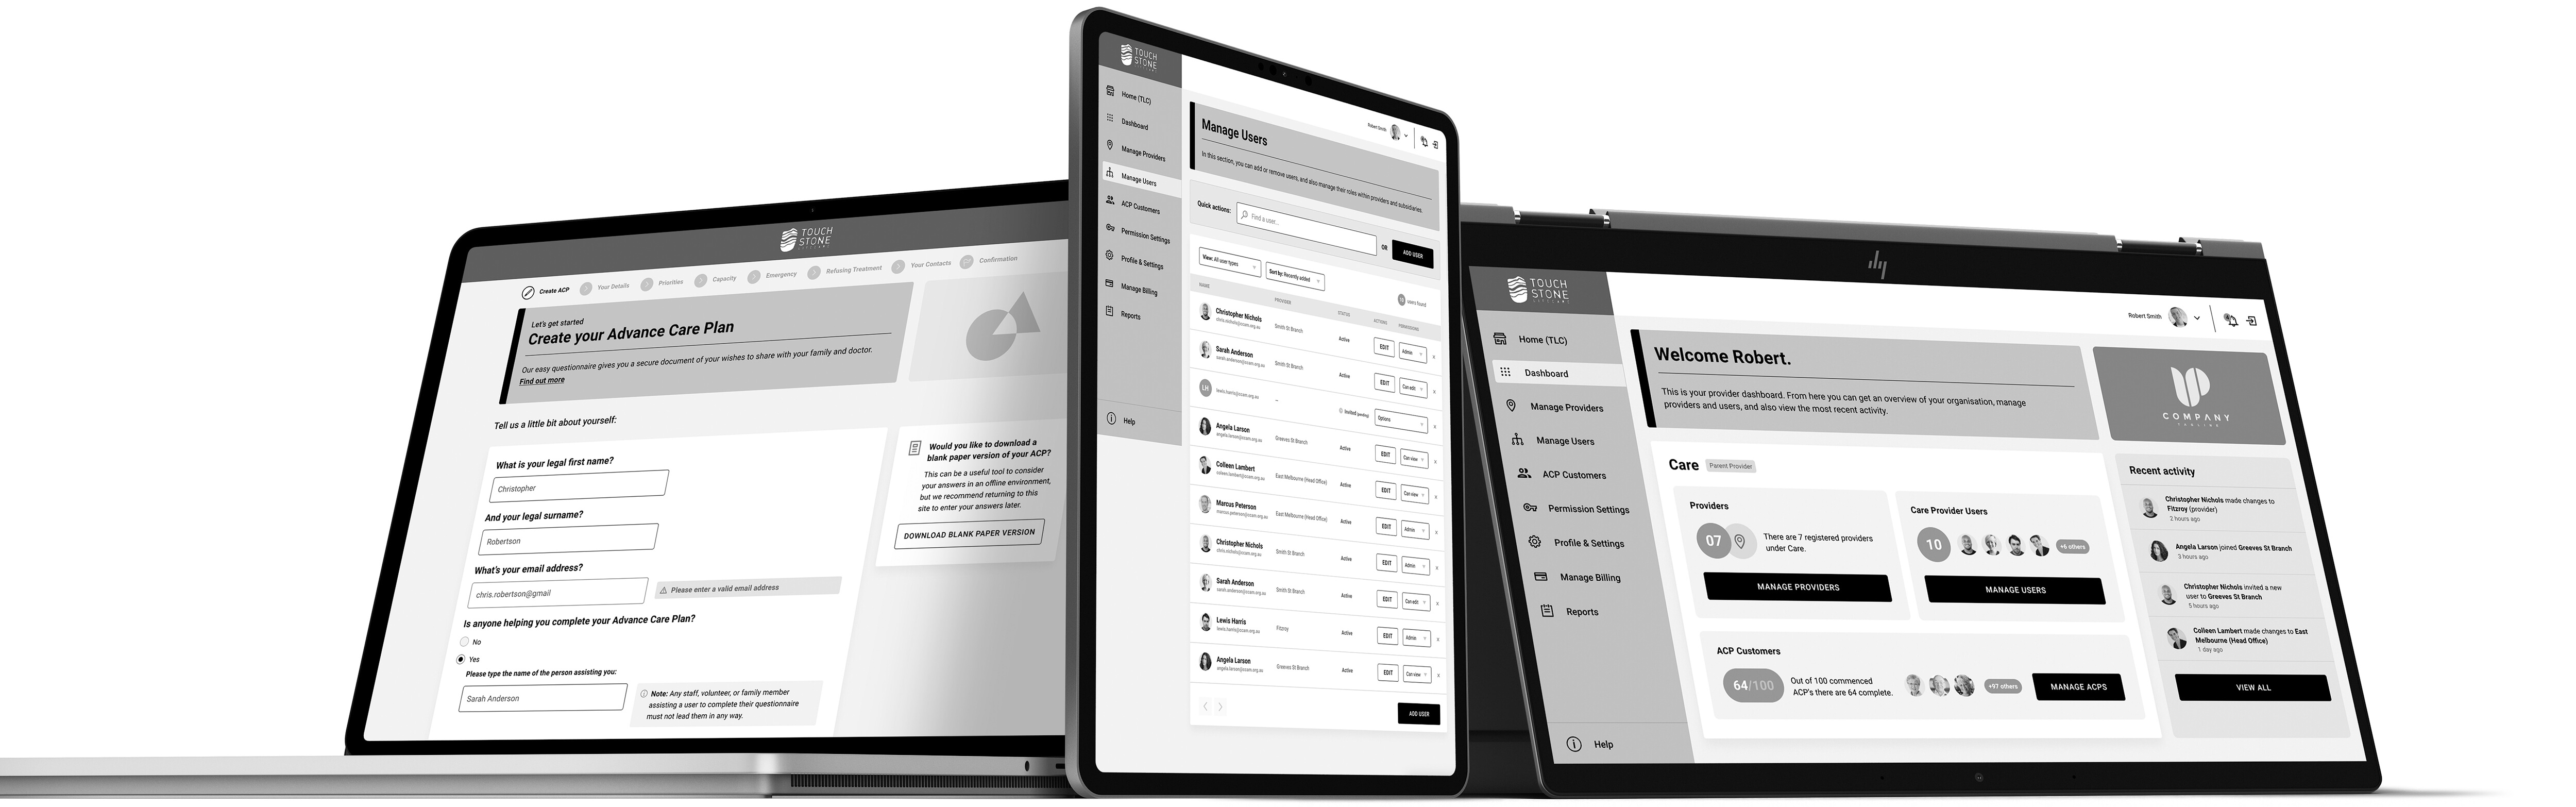 UX user experience case study - Touchstone web application